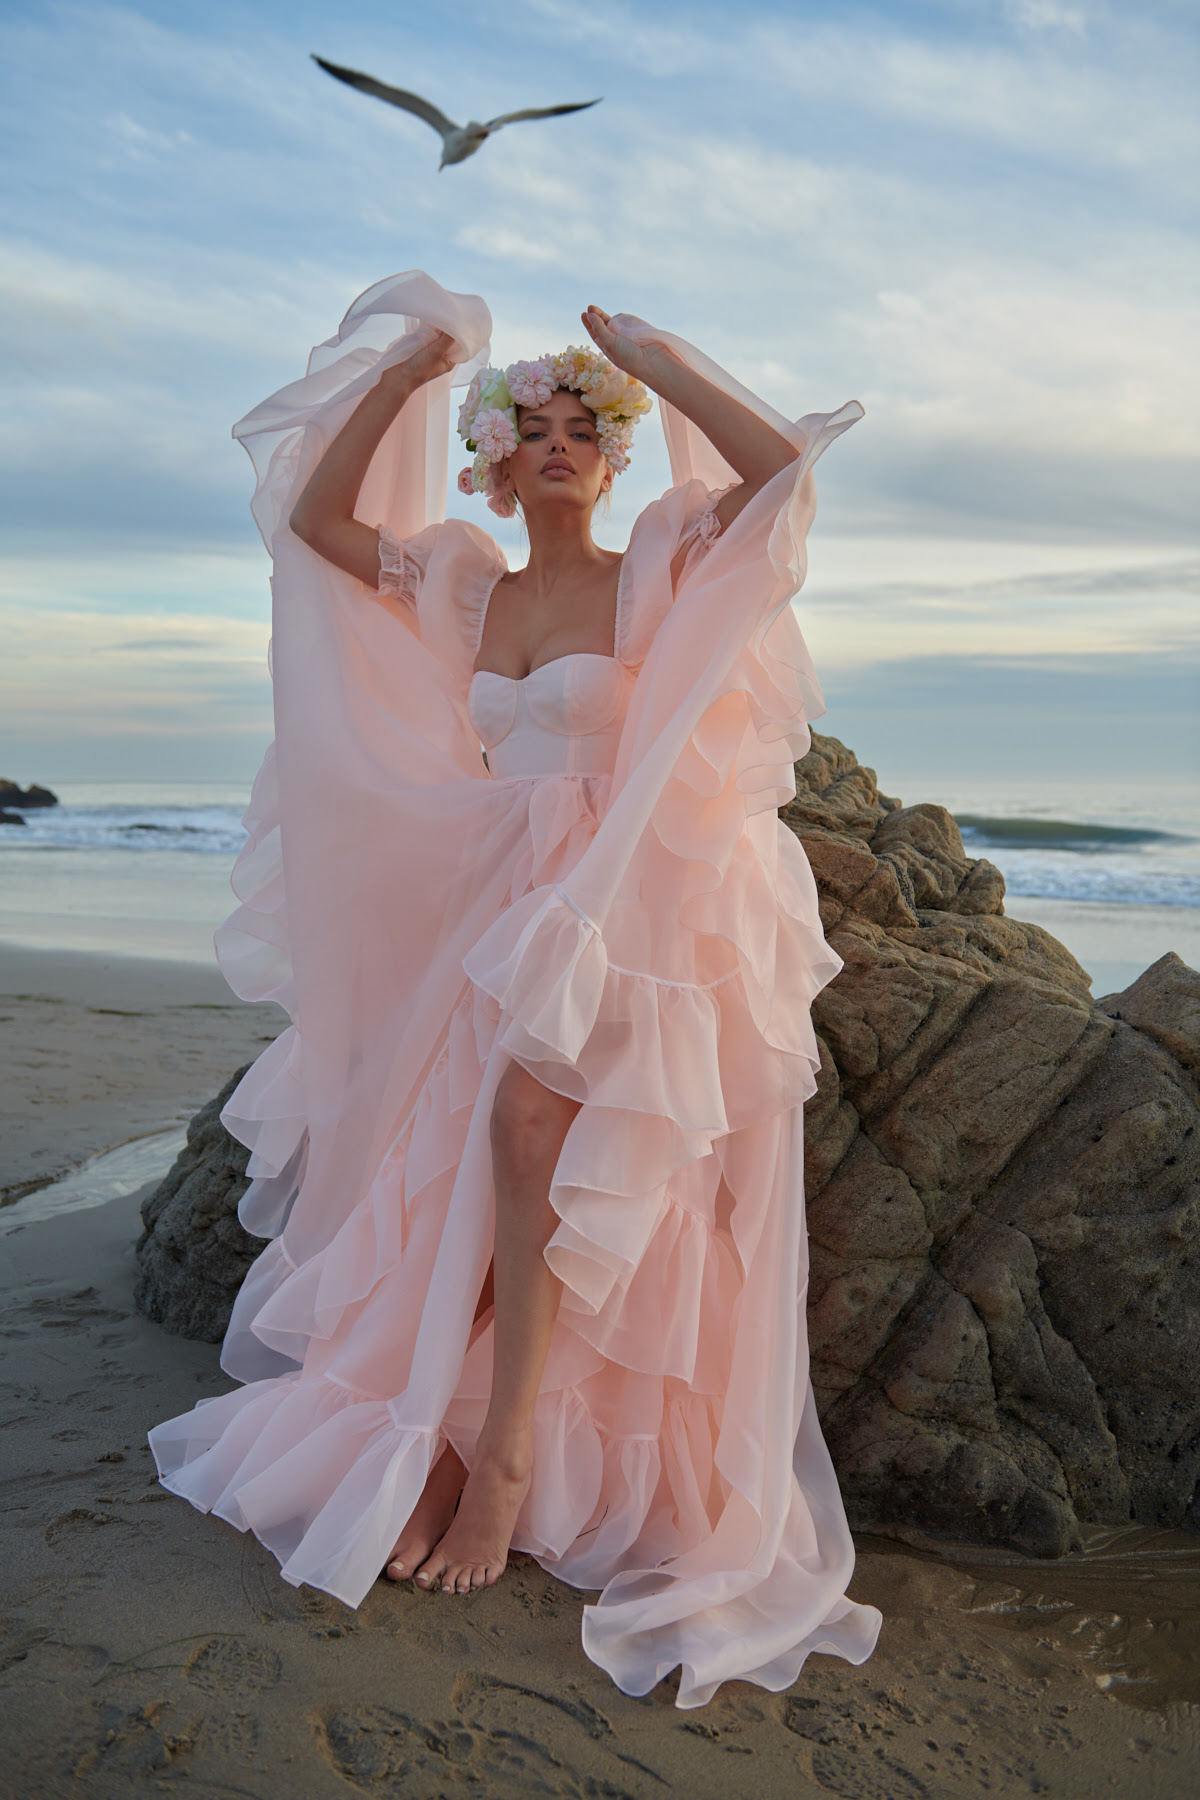 The Peach Fuzz in Bloom Gown